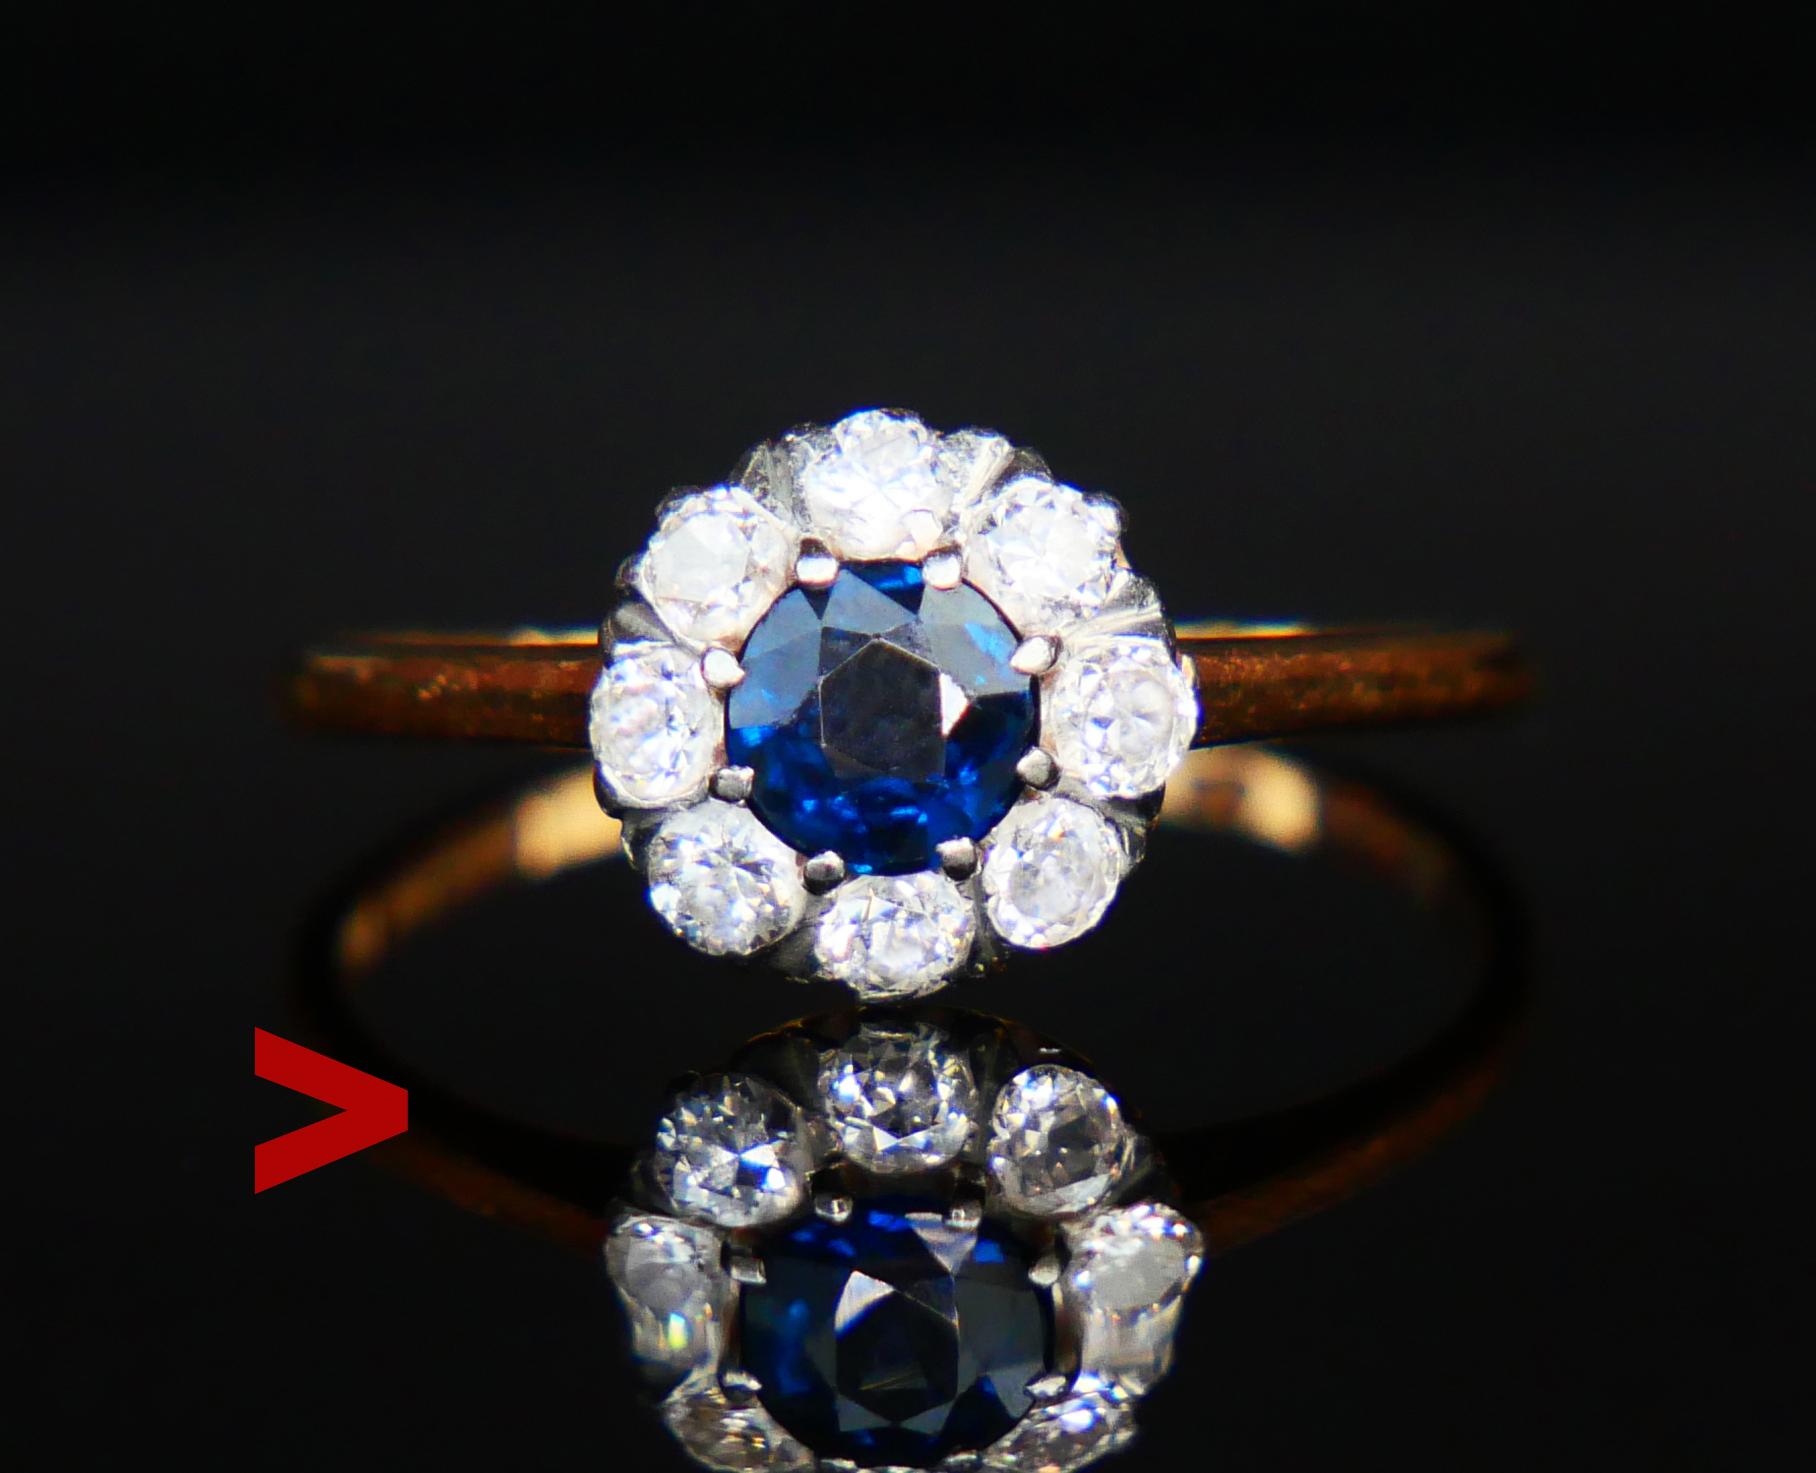 104 years old Halo Ring in solid 18K Yellow Gold with natural Blue Sapphire and 8 old European cut Diamonds in Platinum or White Gold settings.

Natural Sapphire of old European diamond cut , color is medium Blue demonstrates inclusions and